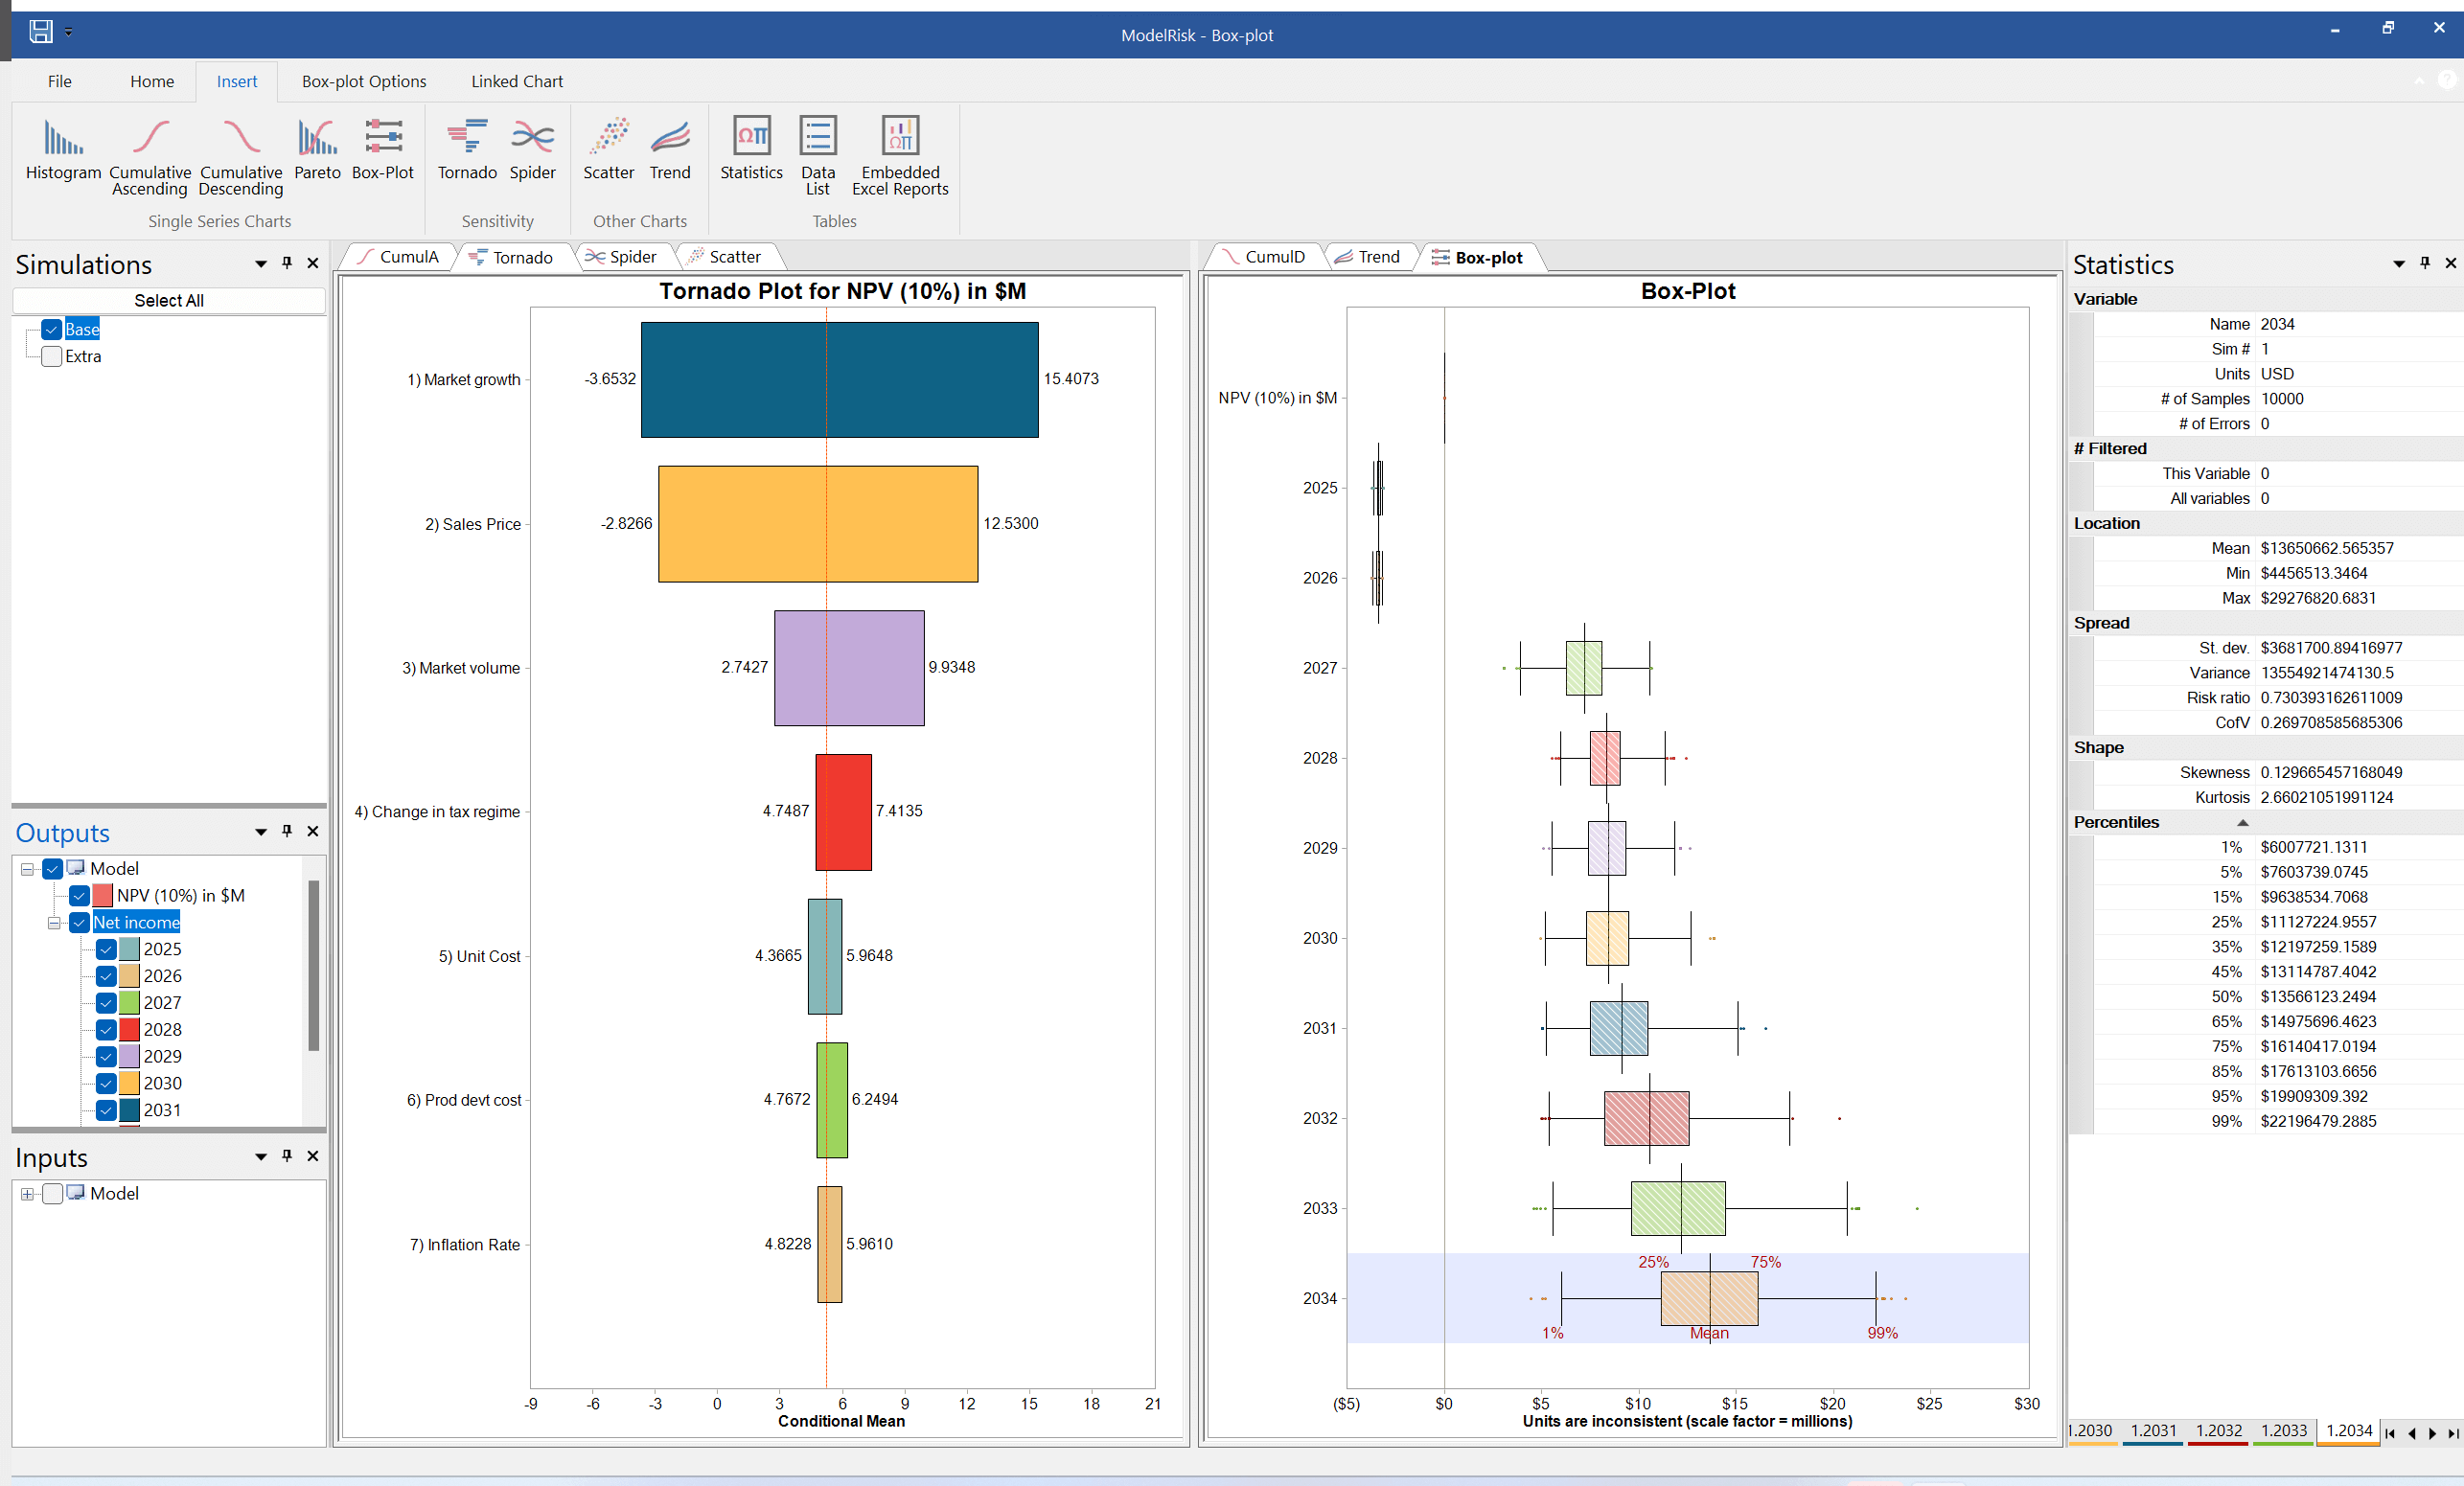 Simulation results in trend and box plot format